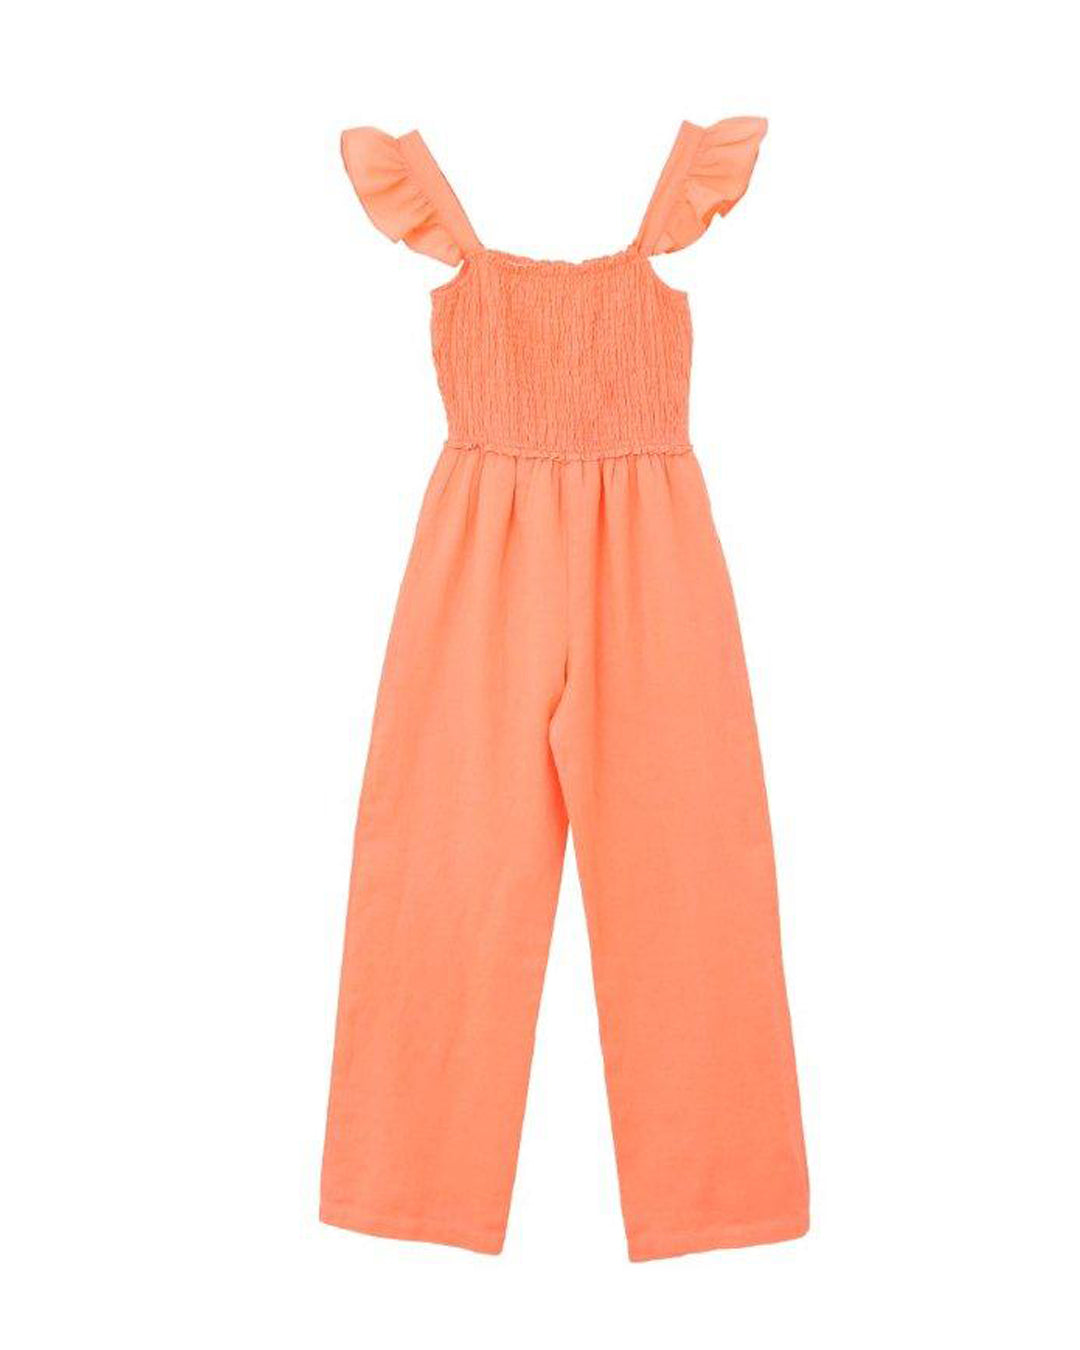 PEACH JUMPSUIT WITH FLUTTER SLEEVES